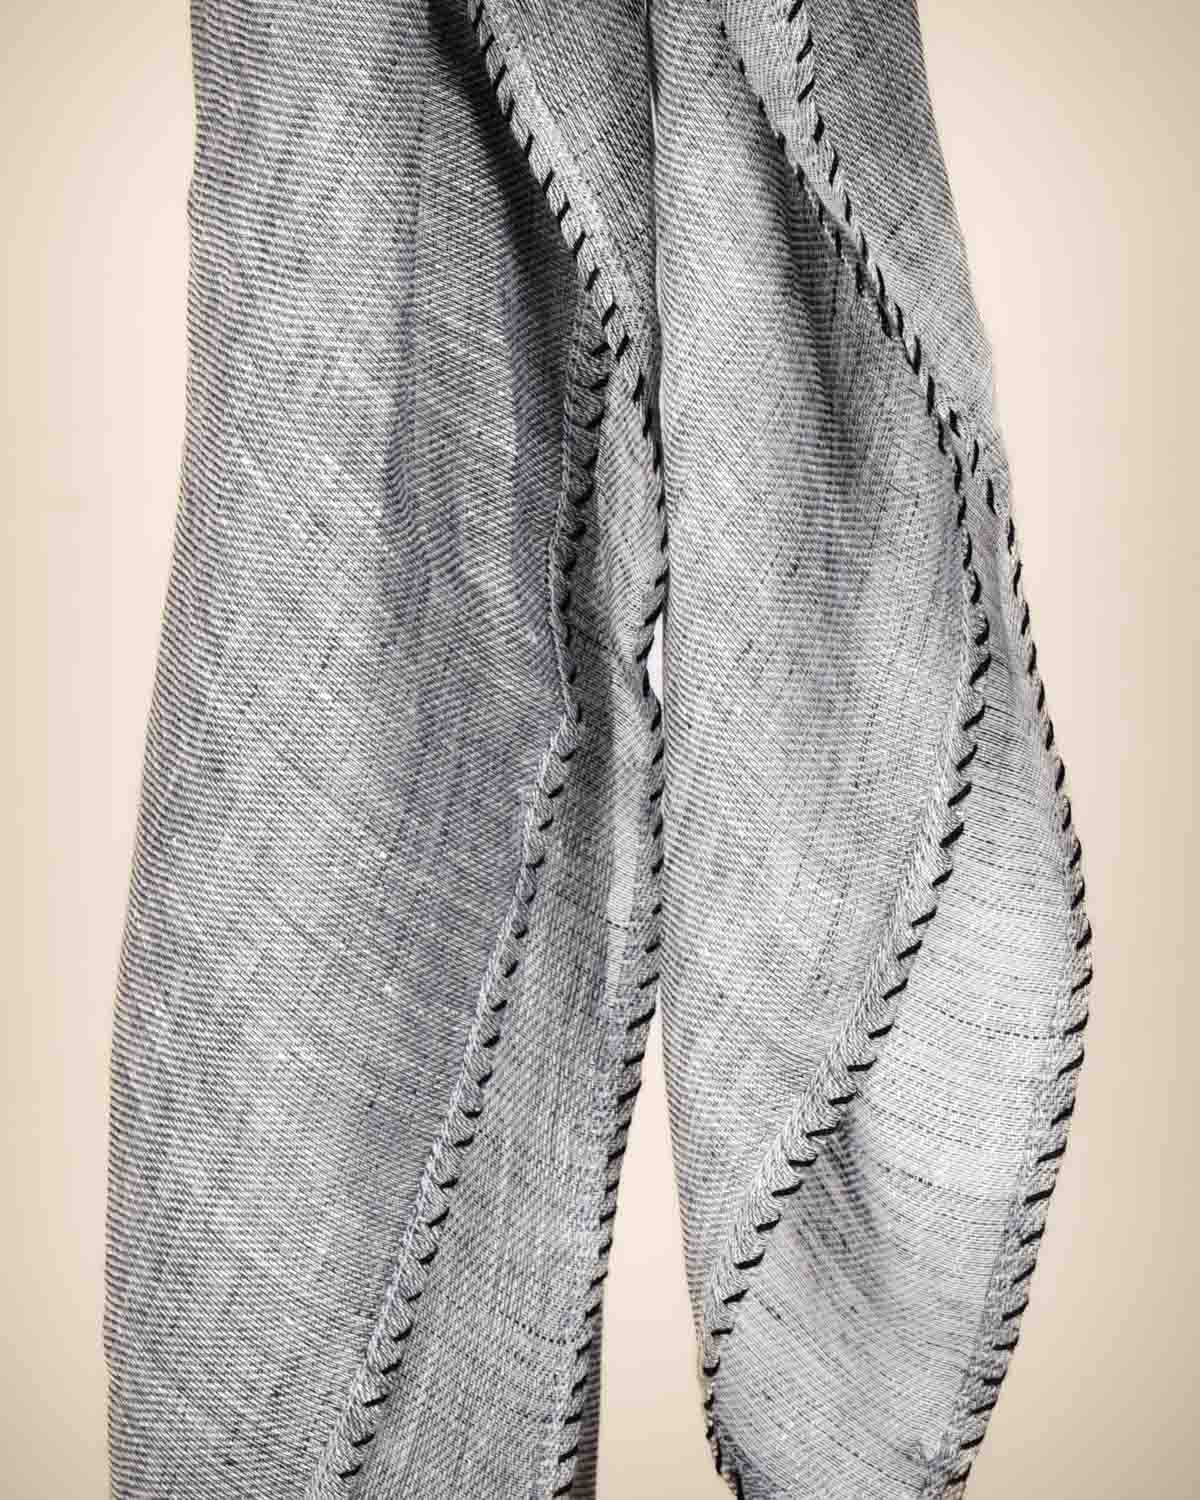 Gray Textured Handwoven Linen Scarf 38"x38" - By HolyWeaves, Benares